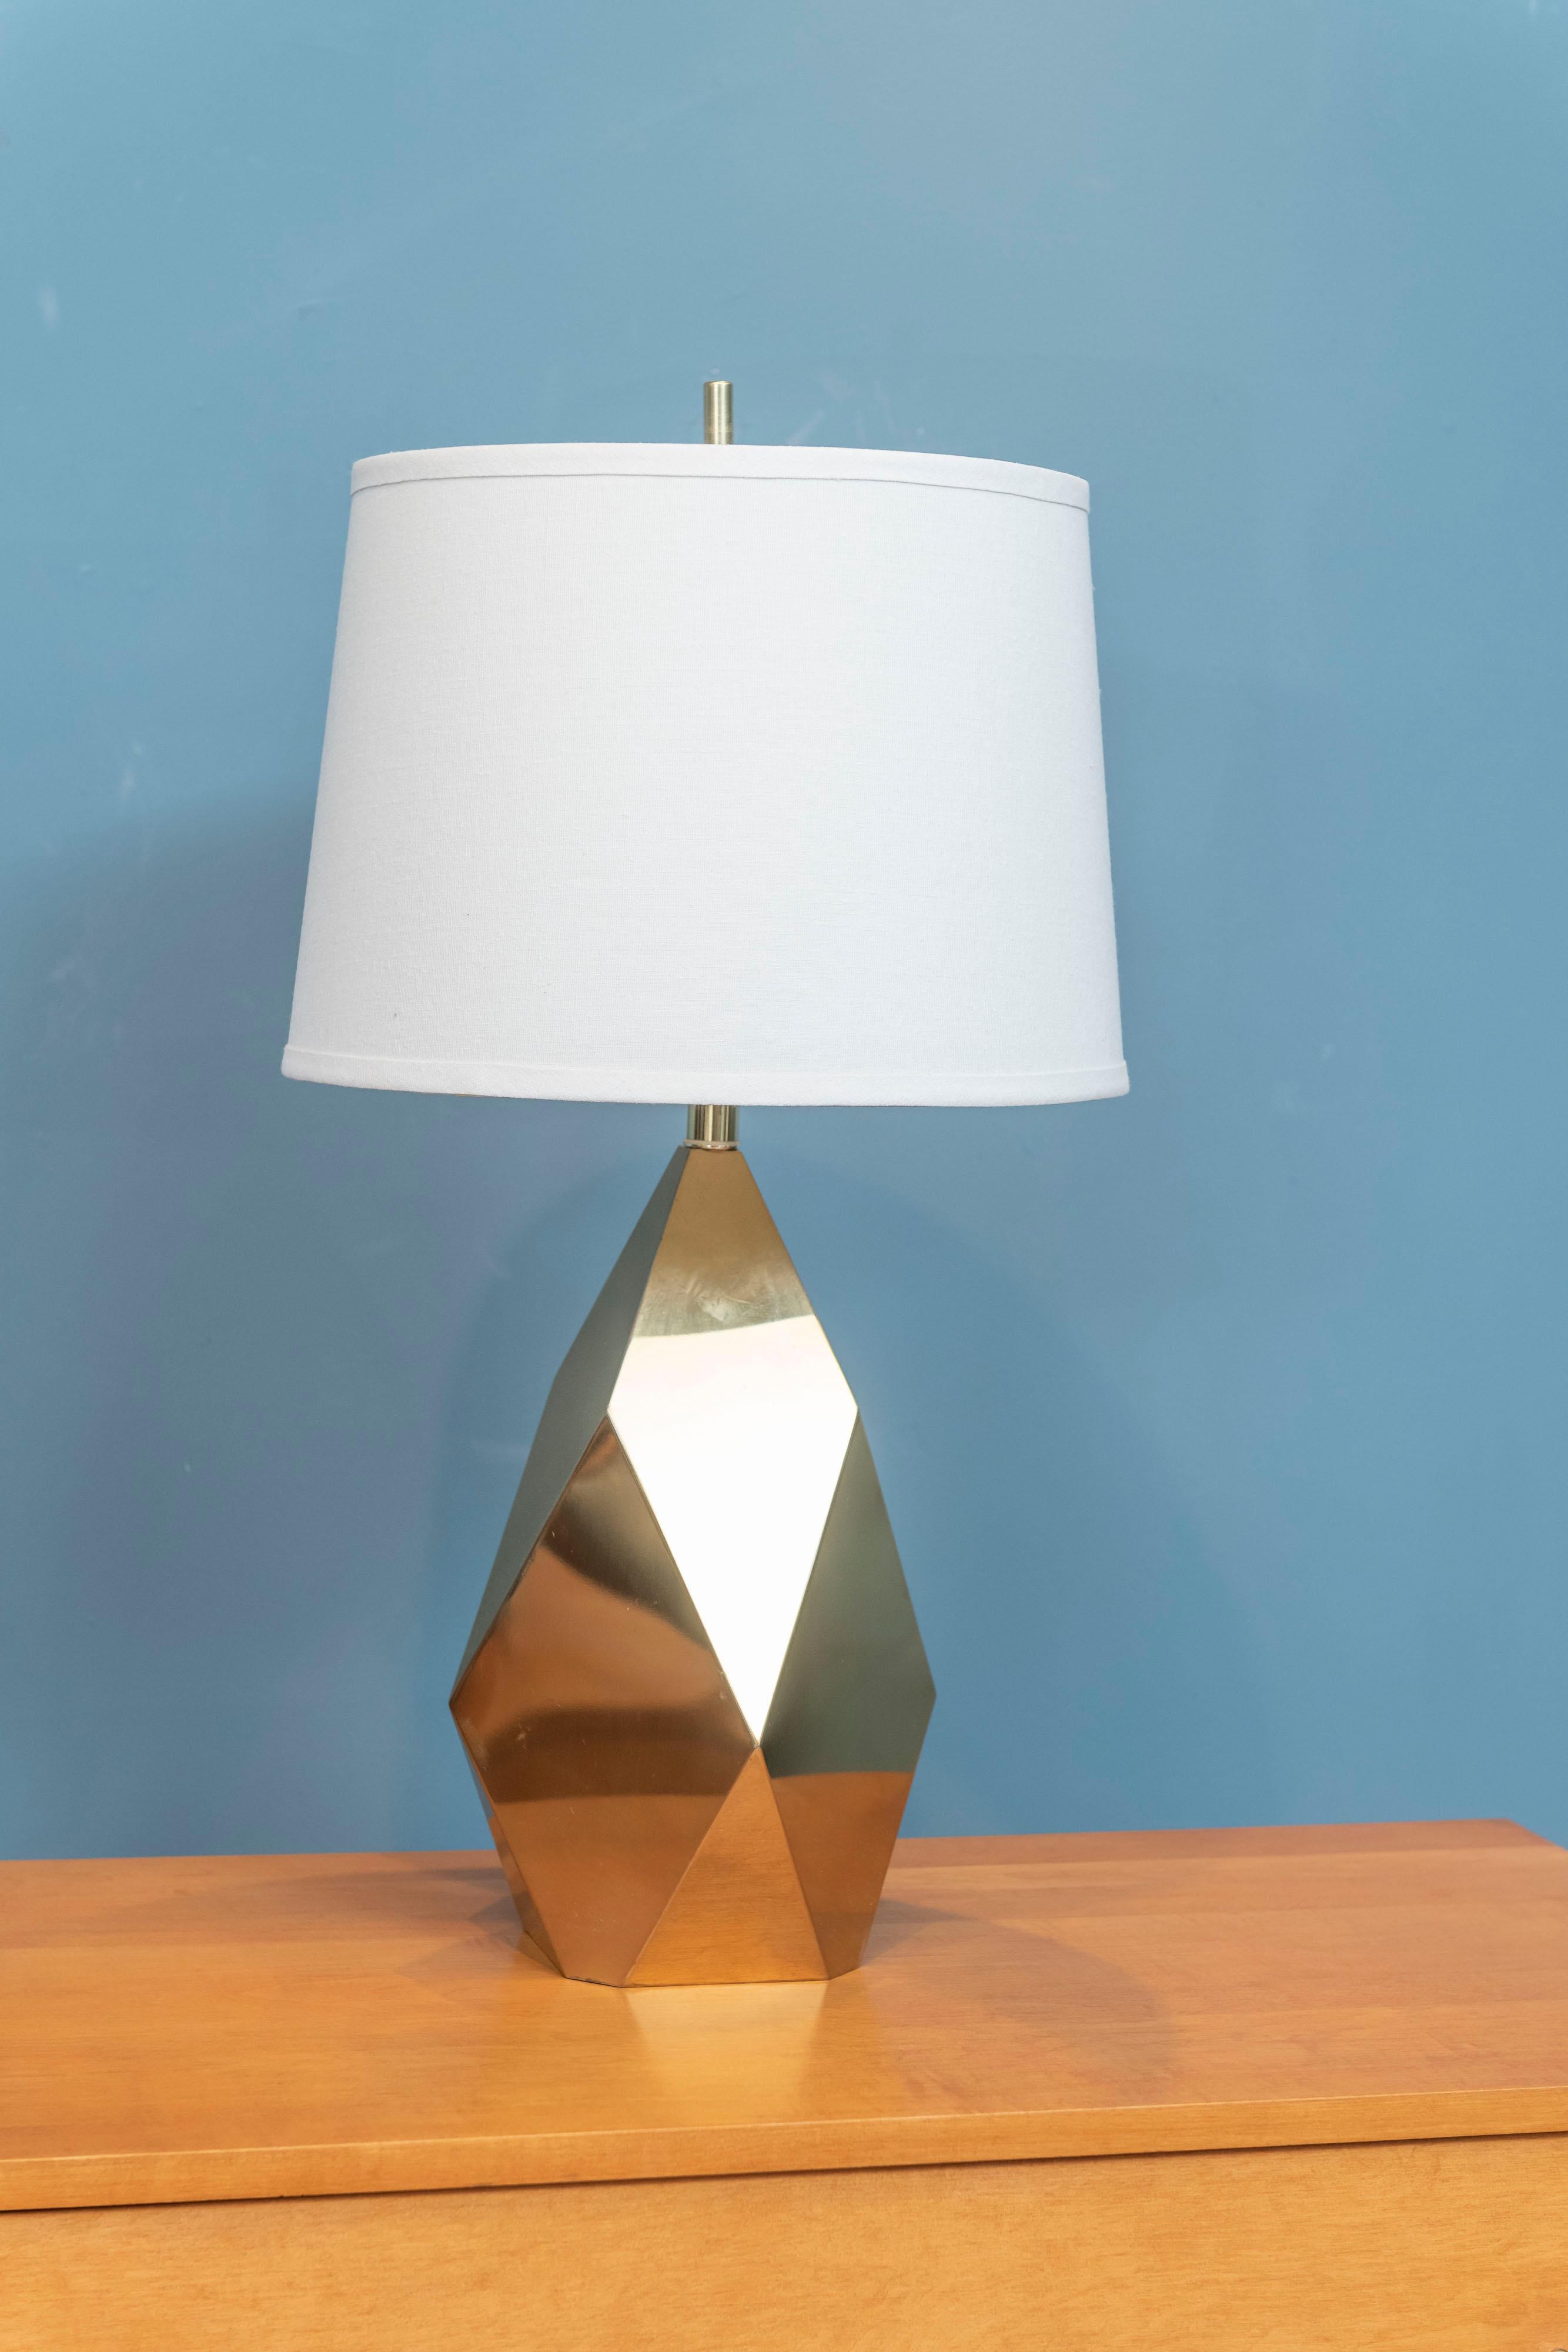 Mid-Century Modern brass faceted diamond motif table lamp. Good quality designed lamp ready to be enjoyed.